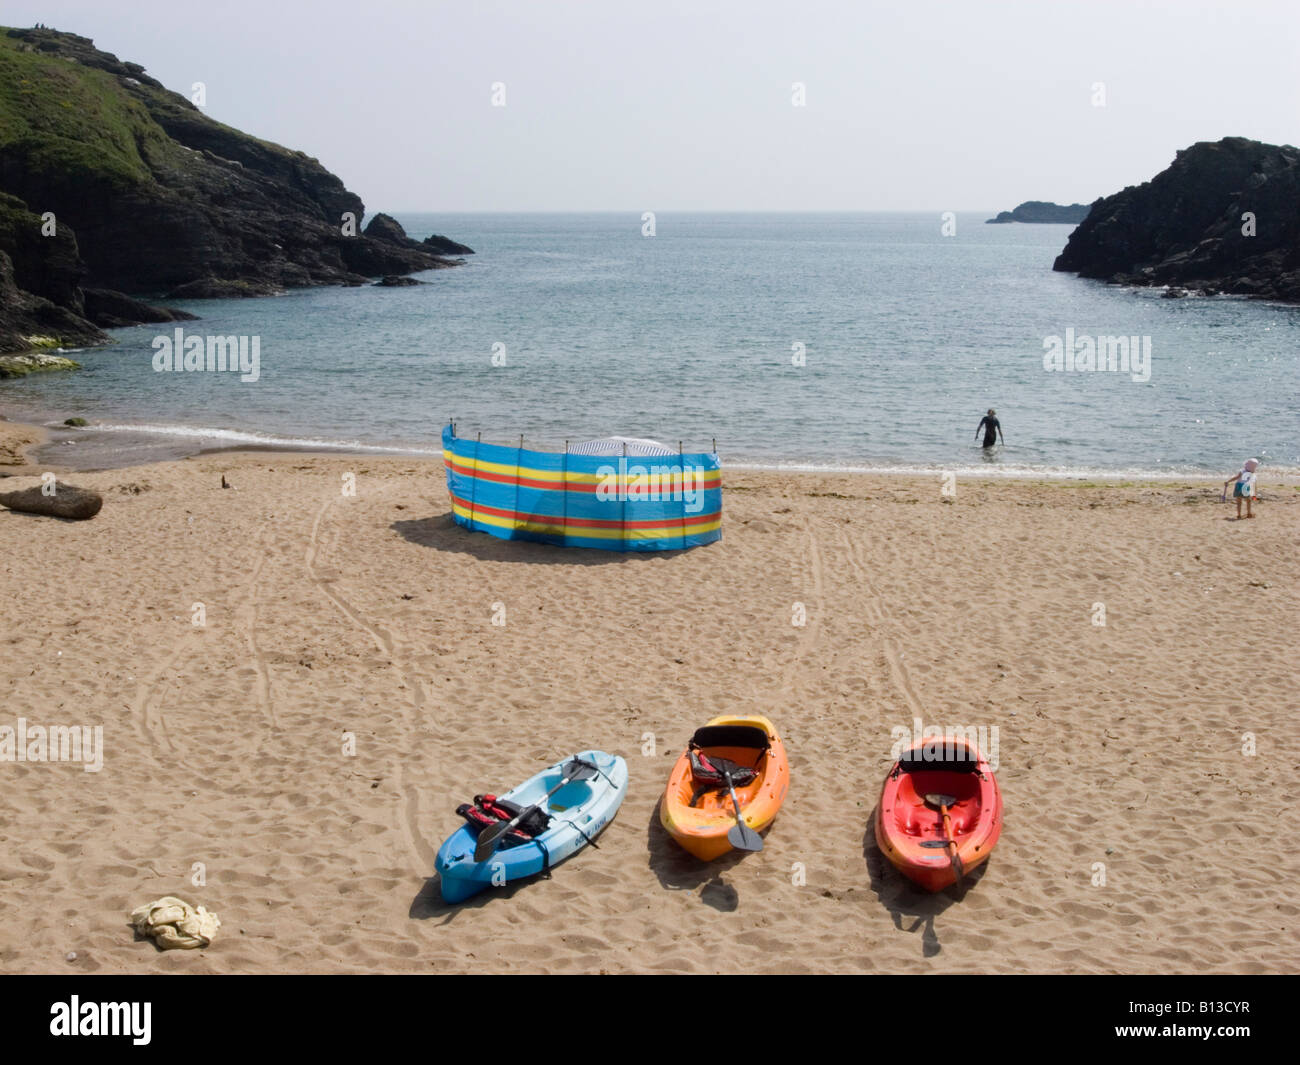 Three colourful canoes and a windbreaker on a sandy beach. Soar Mill Cove, South Hams, South Devon. UK Stock Photo